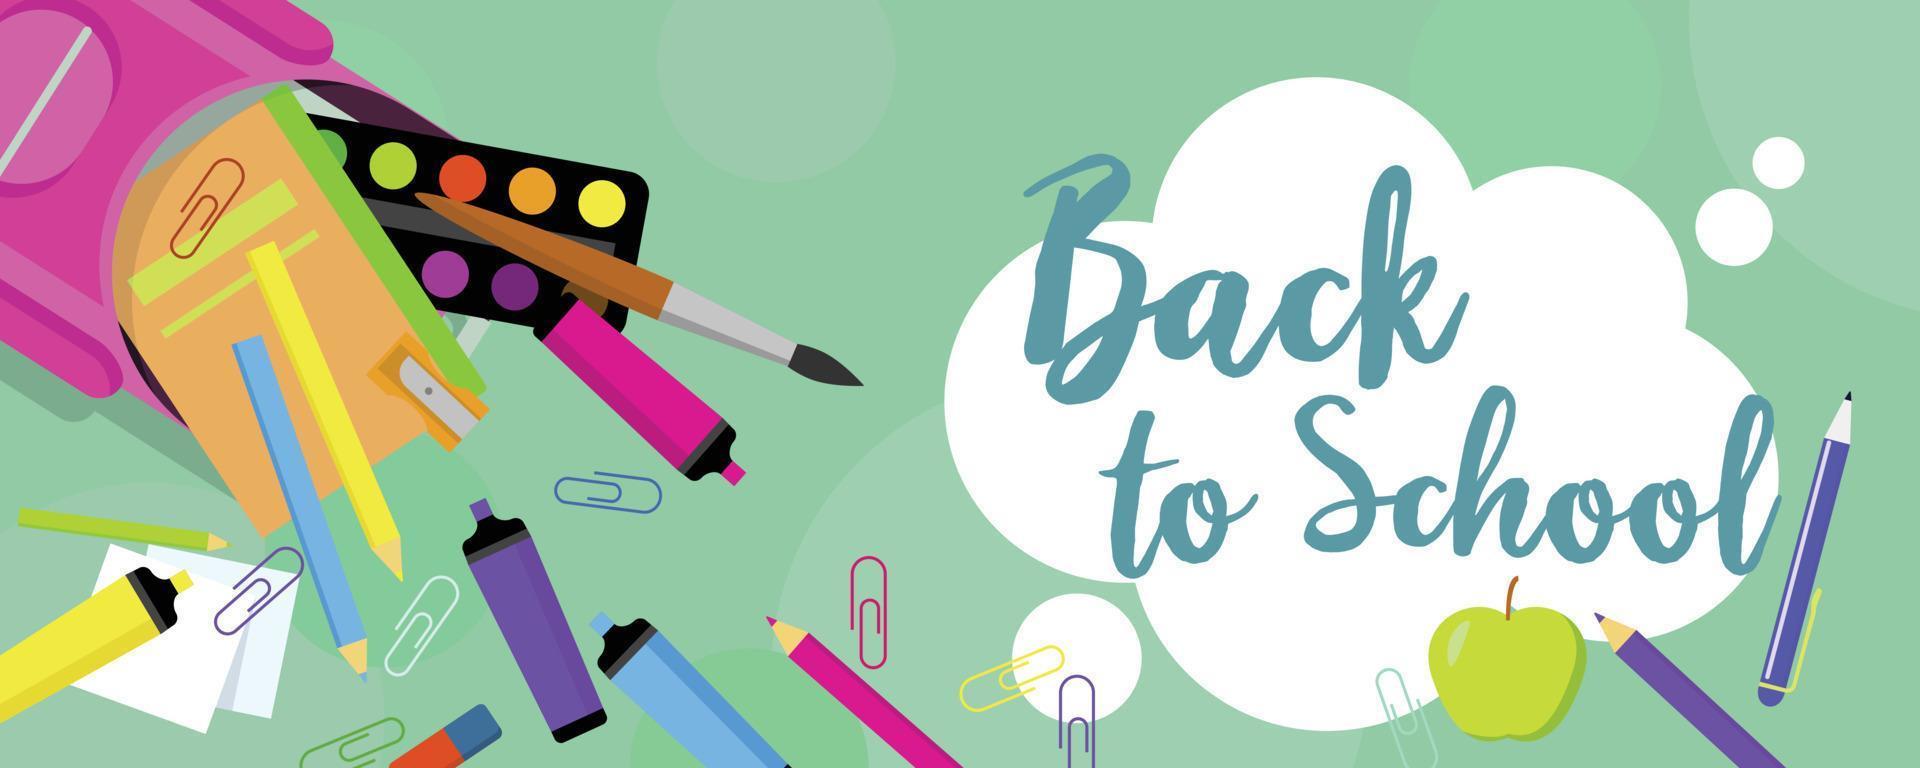 Back to school pens banner horizontal, flat style vector